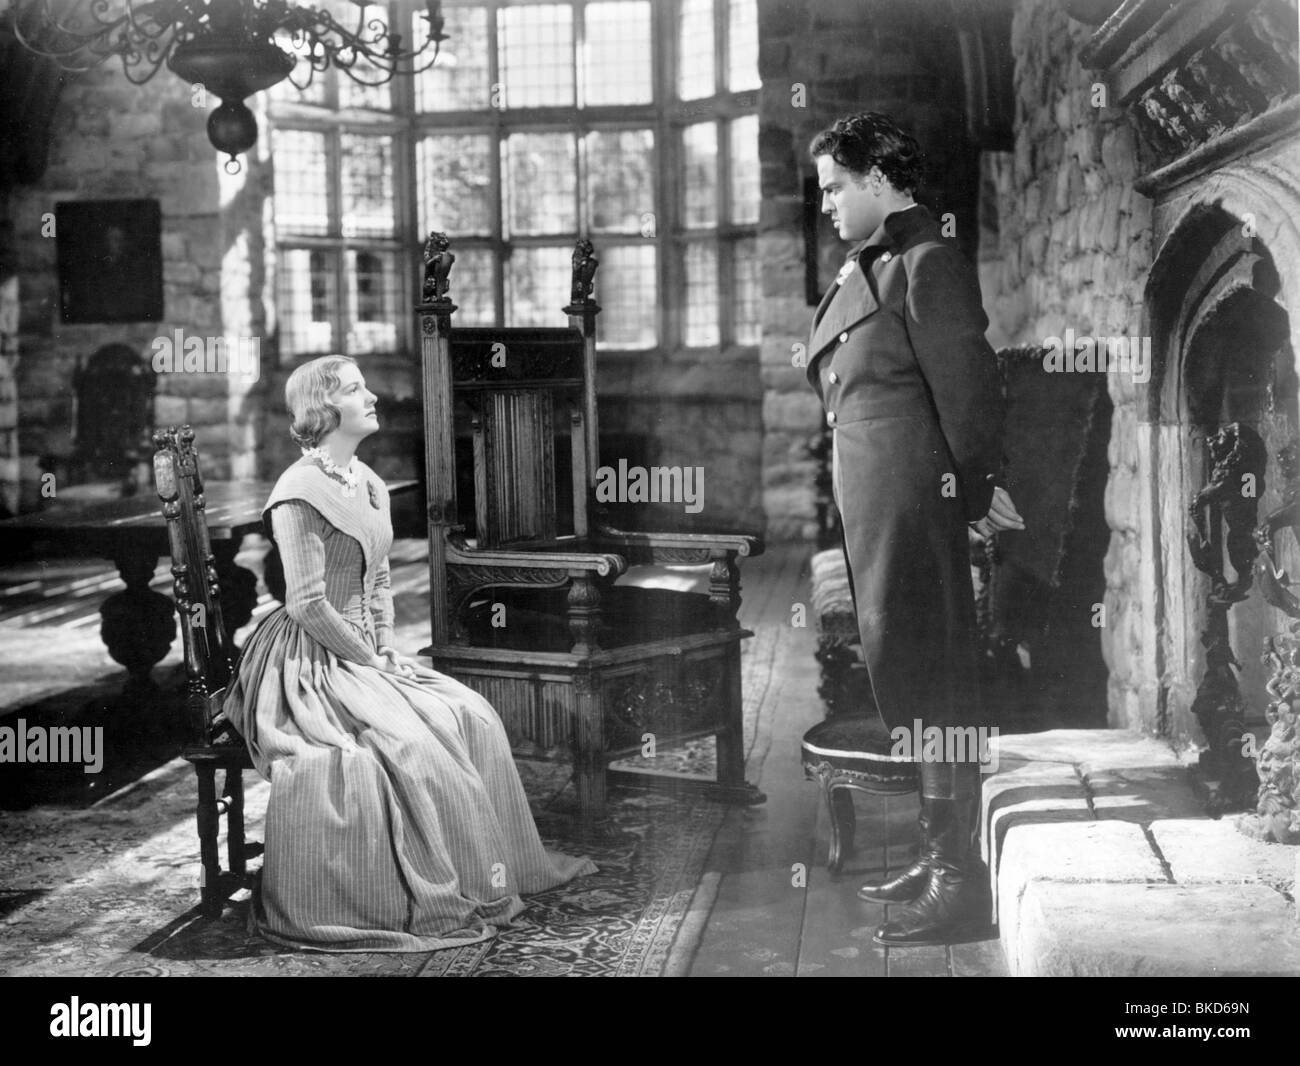 JANE EYRE (1943) JOAN FONTAINE, ORSON WELLES JEY 014P Stockfoto